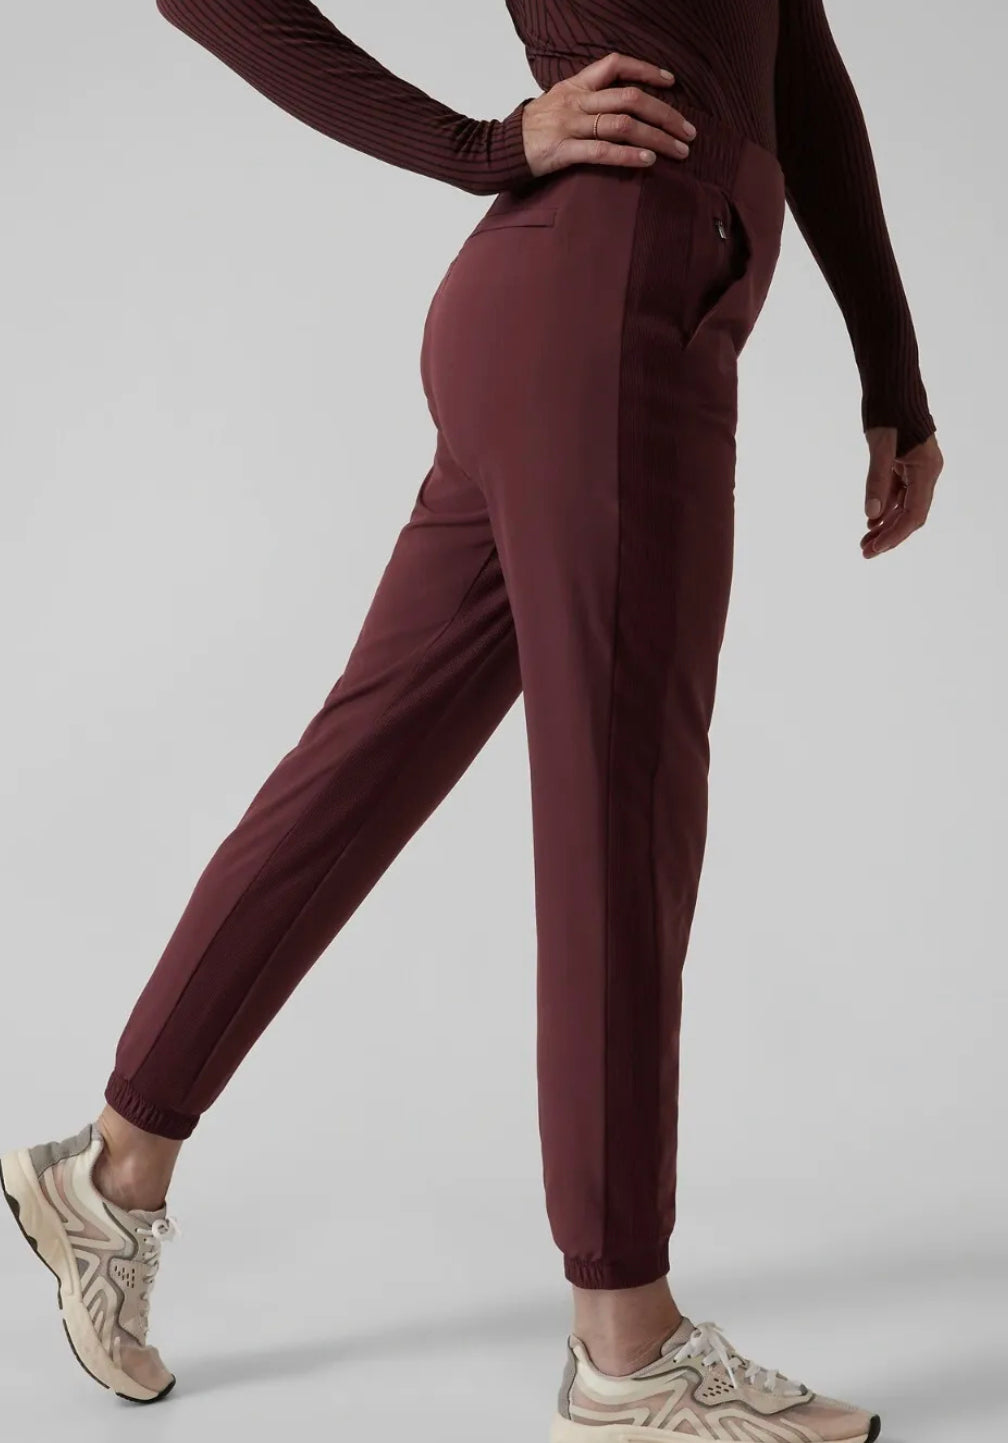 Athleta Lined City Jogger  City jogger, Athleisure trend, Girls joggers